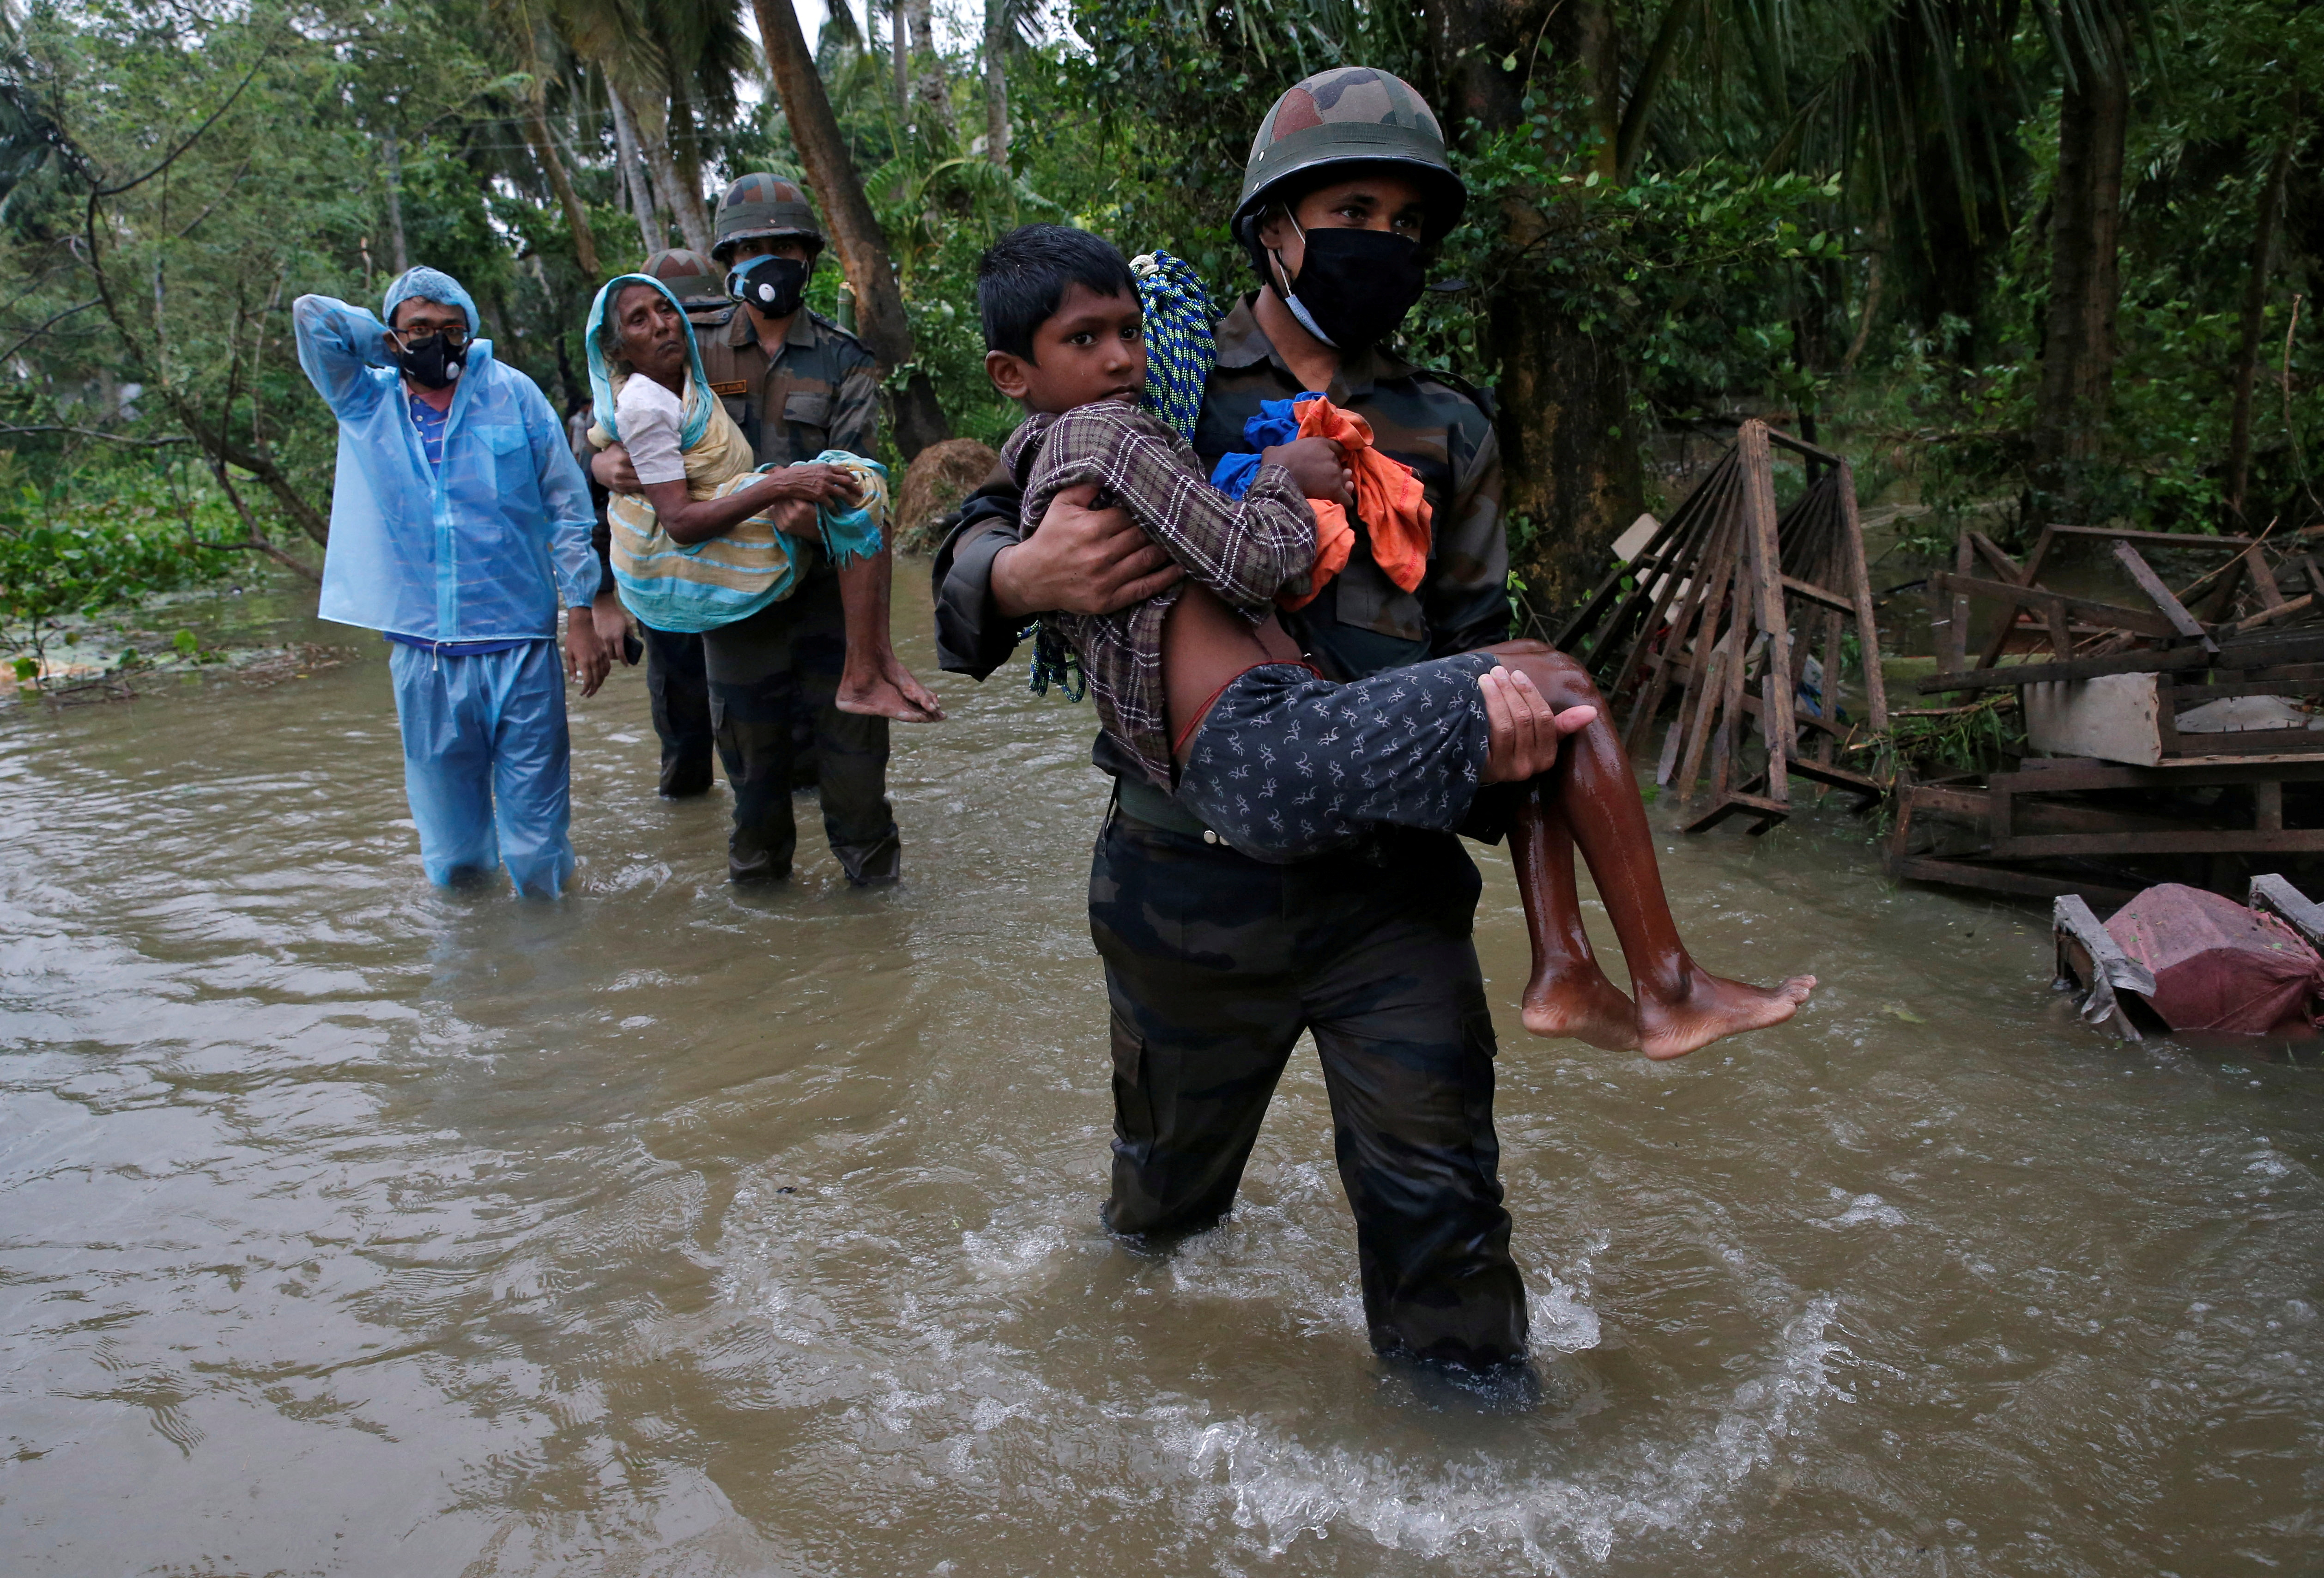 Army soldiers evacuate people from a flooded area to safer places as Cyclone Yaas makes landfall at Ramnagar